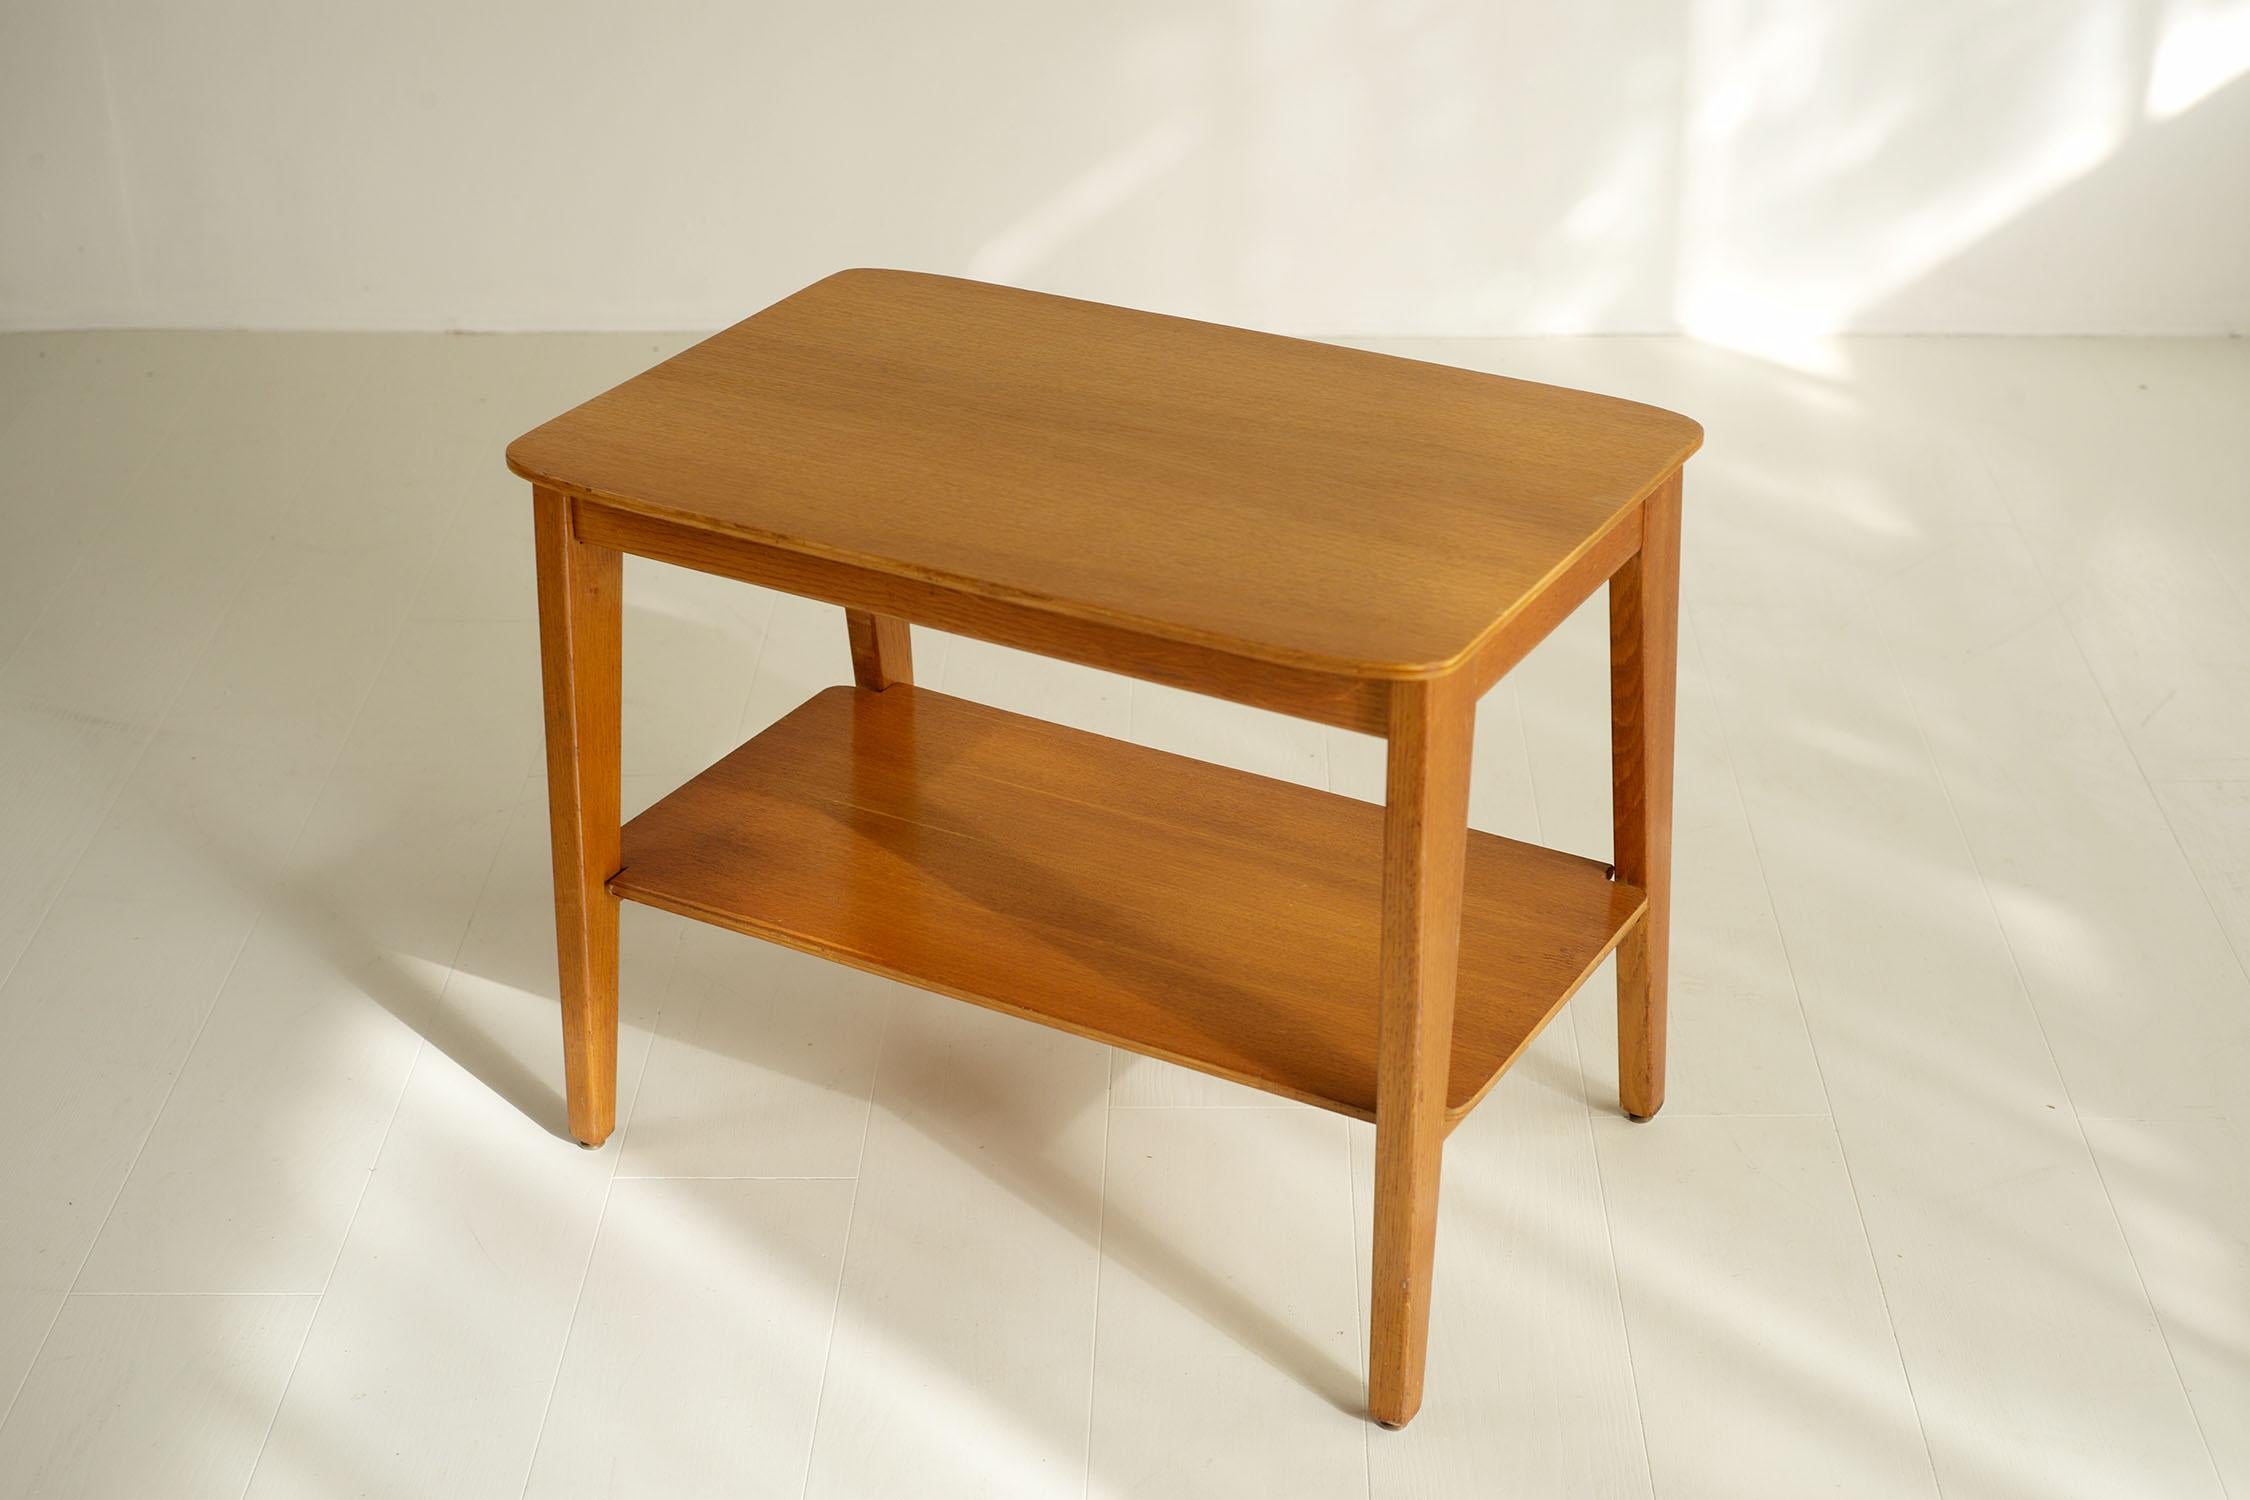 Marcel Gascoin (1907-1986), “TE” table in light oak, ARHEC edition, France 1950.
Father of Rationalism and major player in French Reconstruction, Marcel Gascoin designs quality furniture with clean lines with his design office, ARHEC (Rational